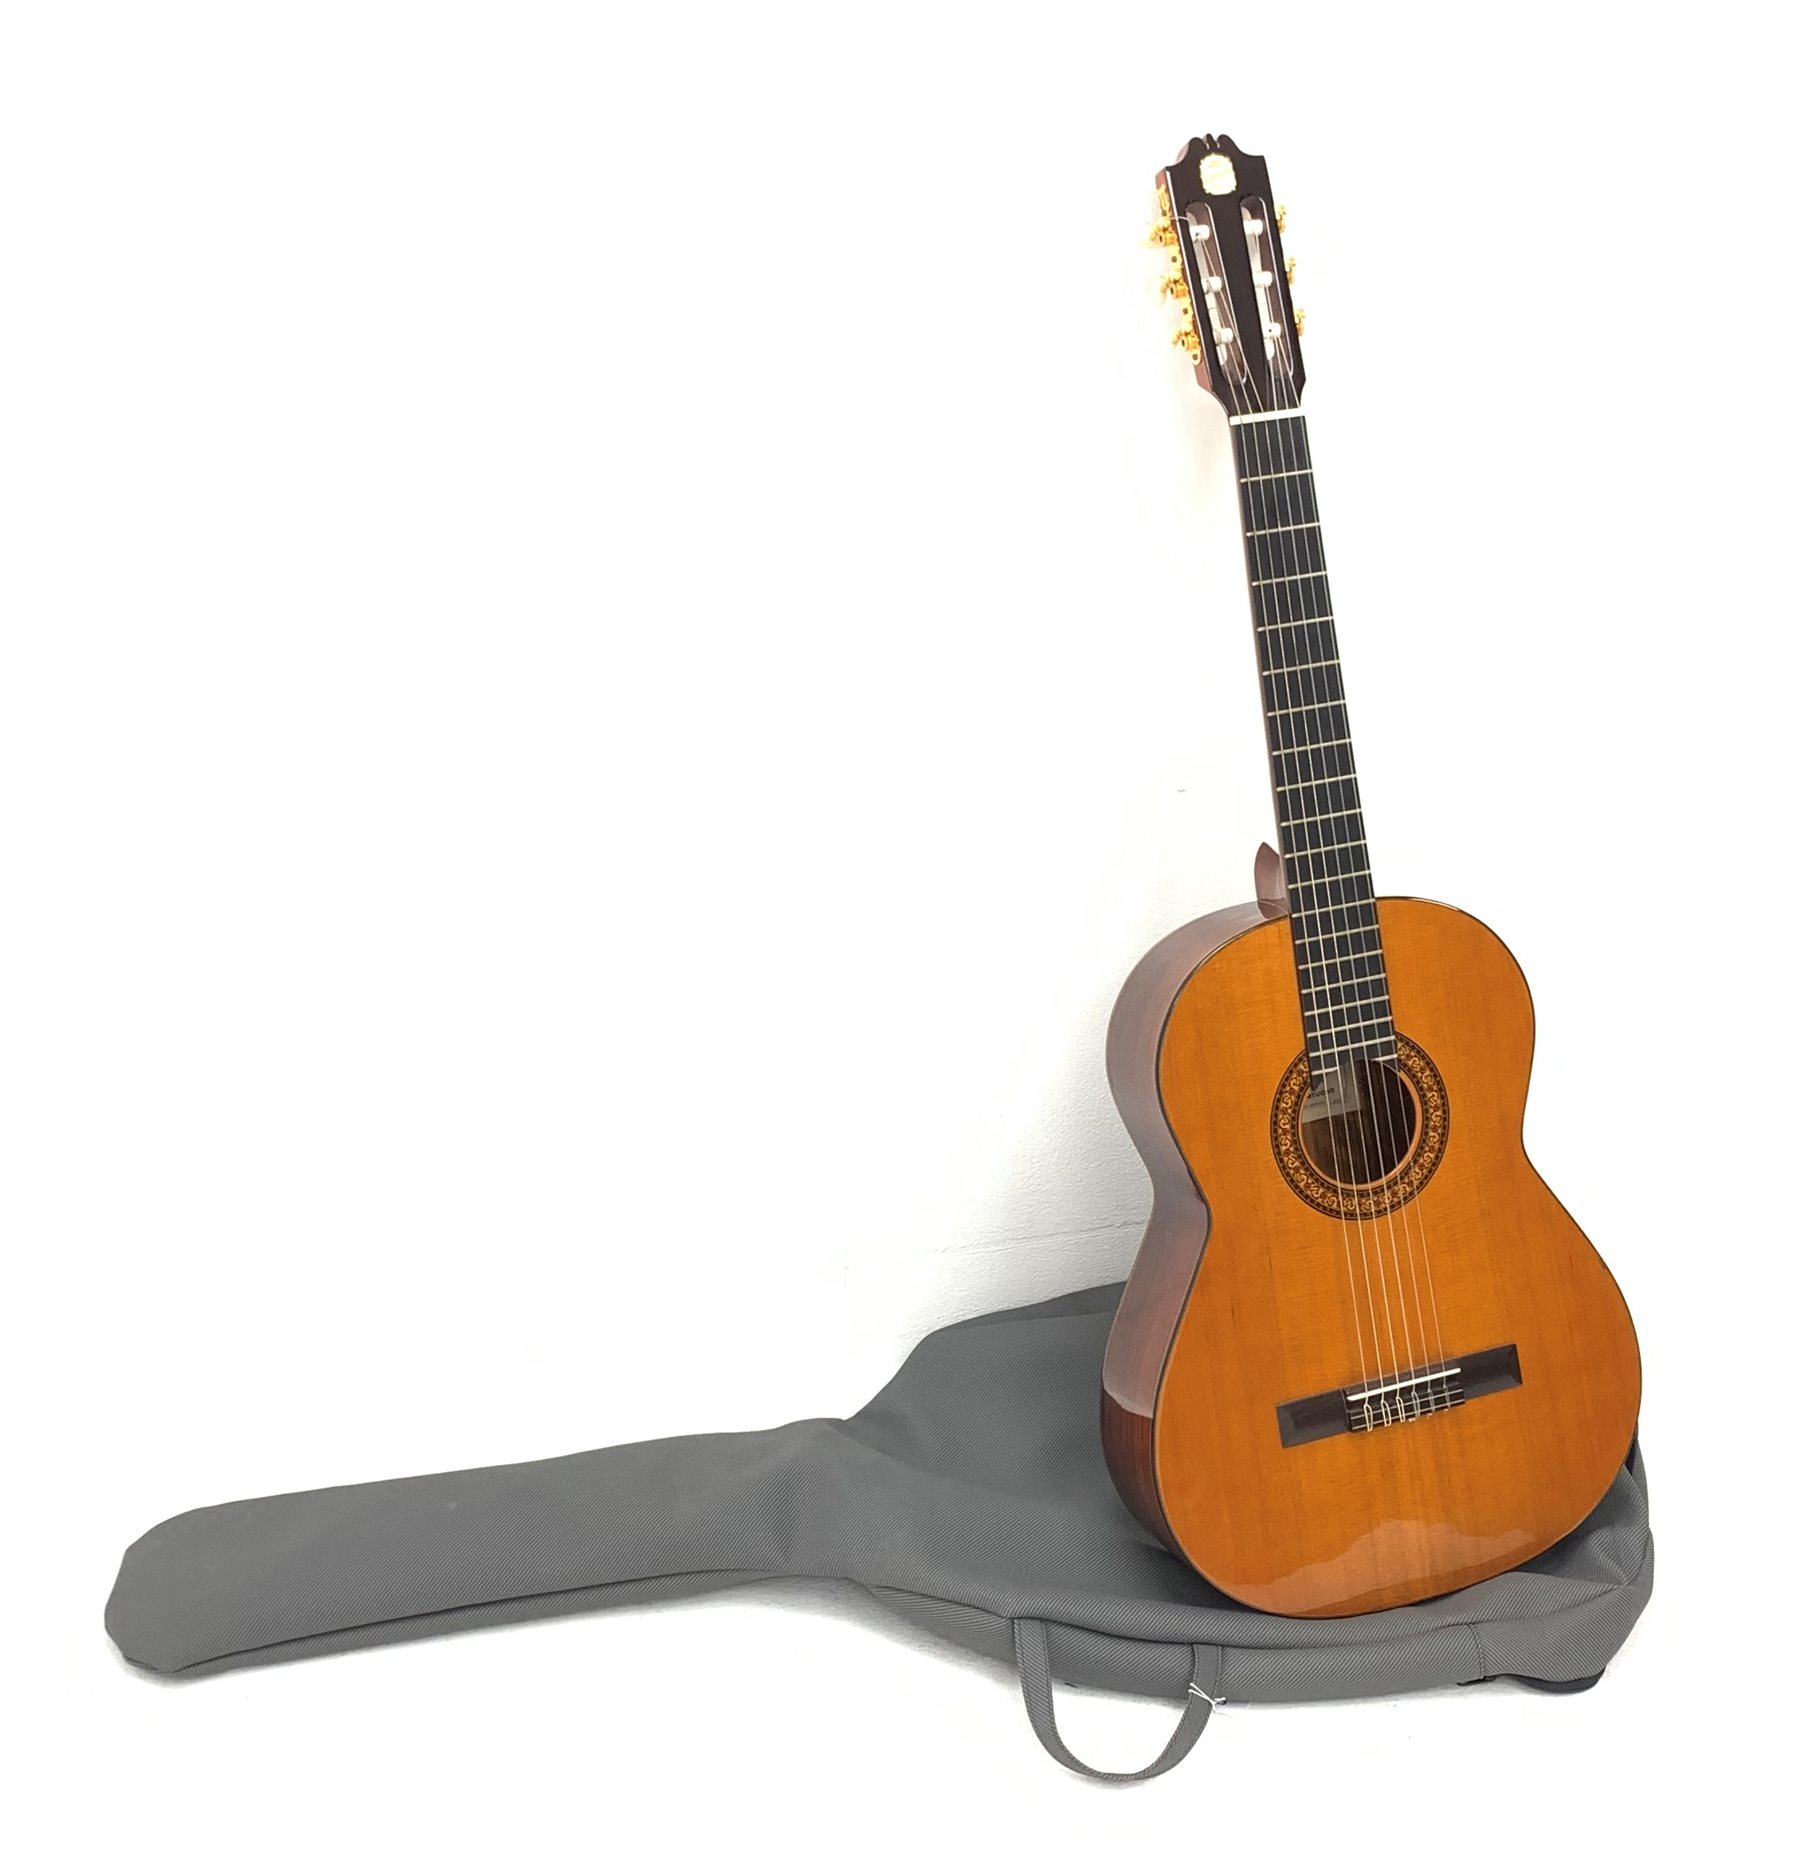 Admira Spain Virtuoso acoustic guitar , bears label, 101cm overall, in soft  carrying case; together with a Seiko quartz guitar tuner (2) - Musical &  Scientific Instruments, Cameras & Maritime